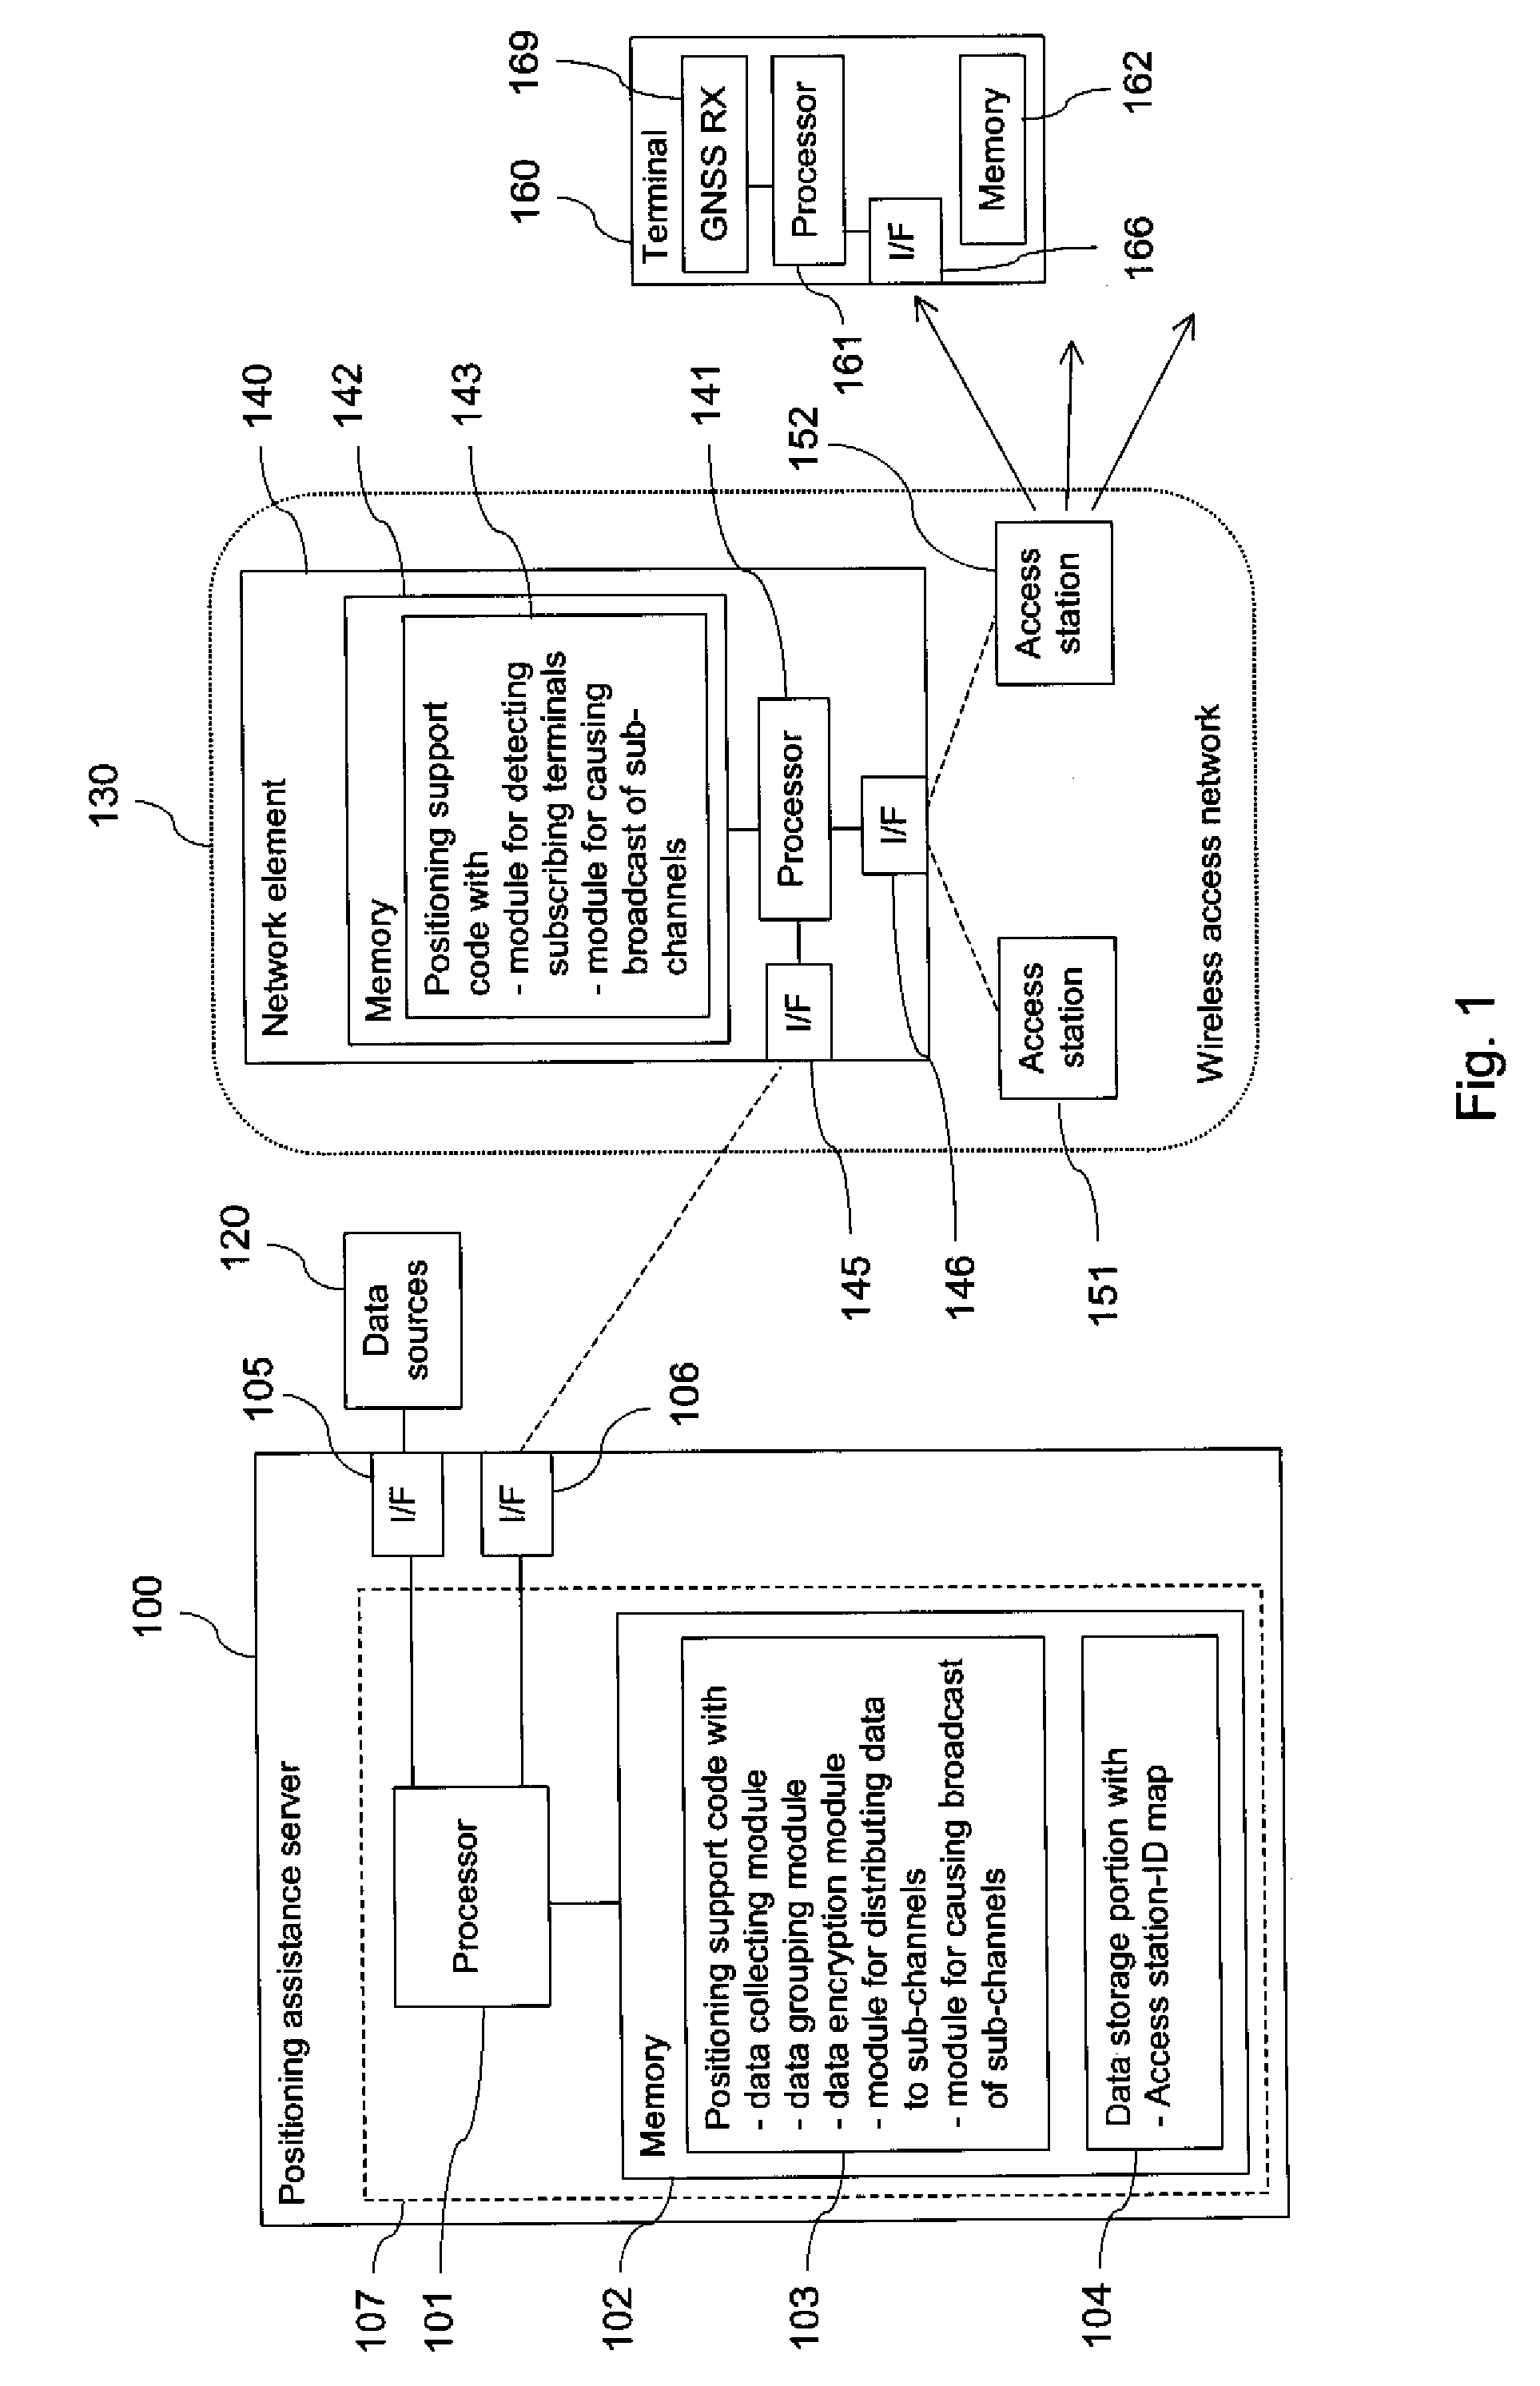 Providing positioning assistance data